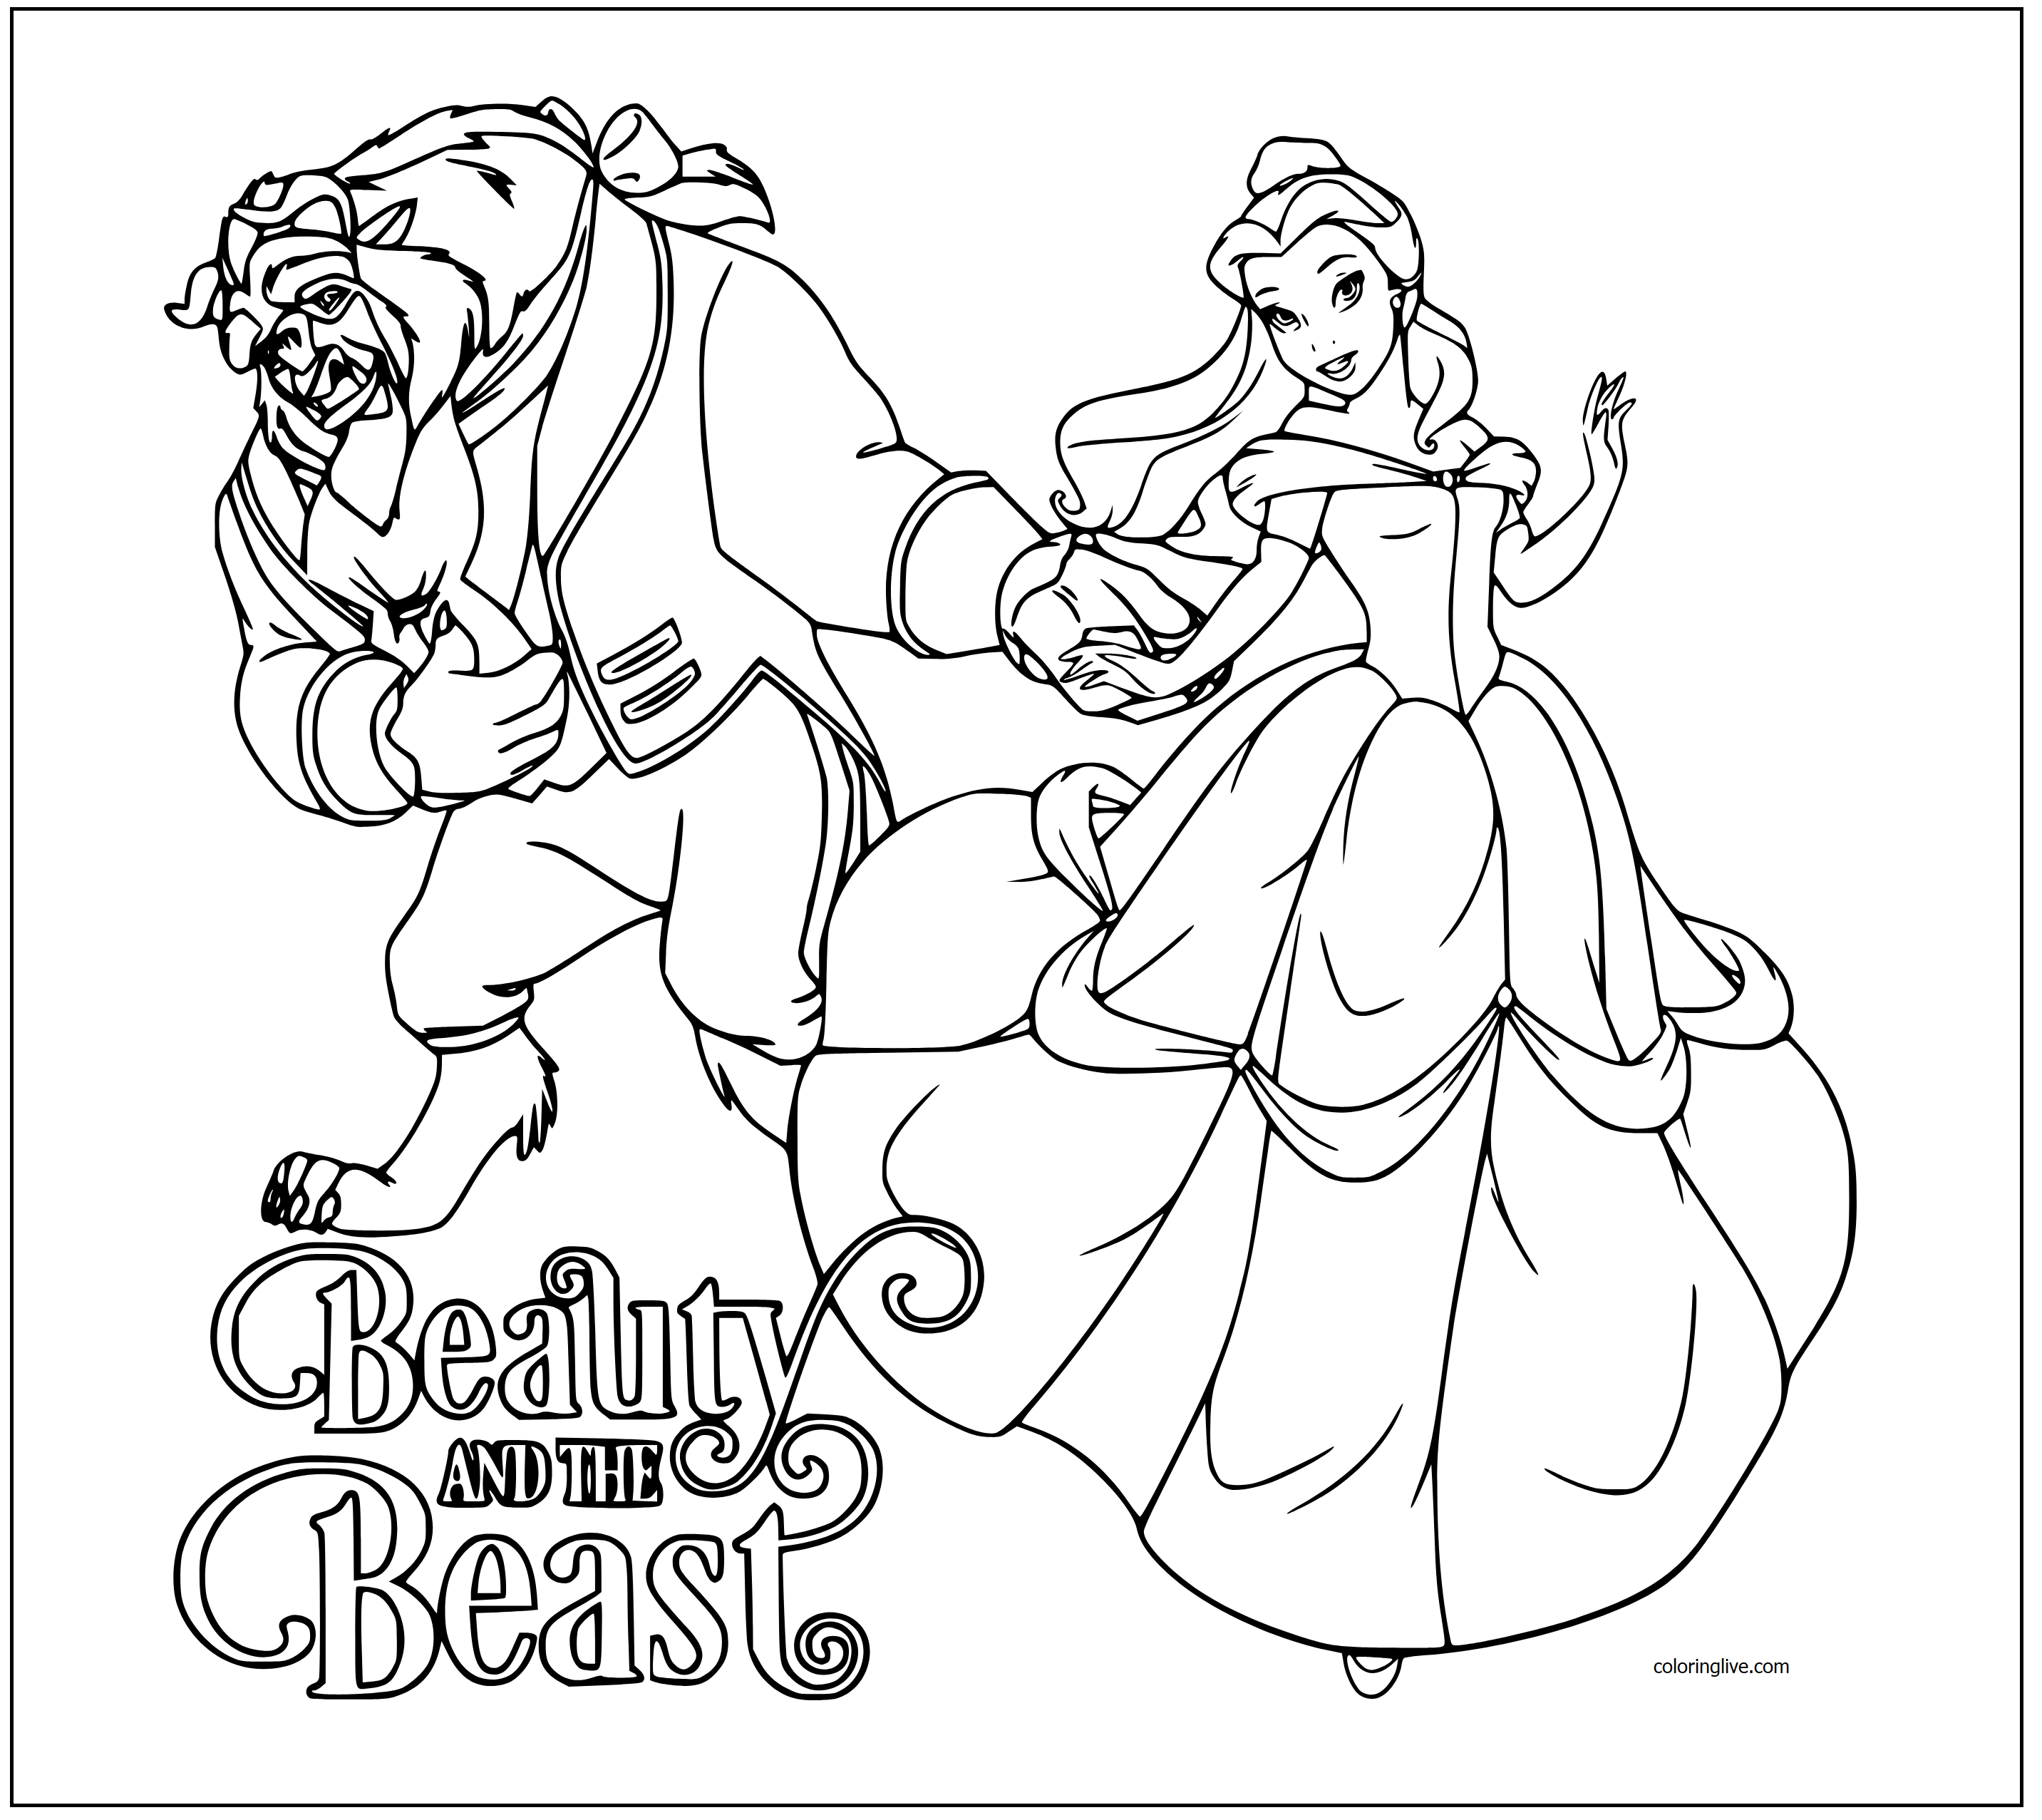 Printable Belle the beauty and the beast Coloring Page for kids.